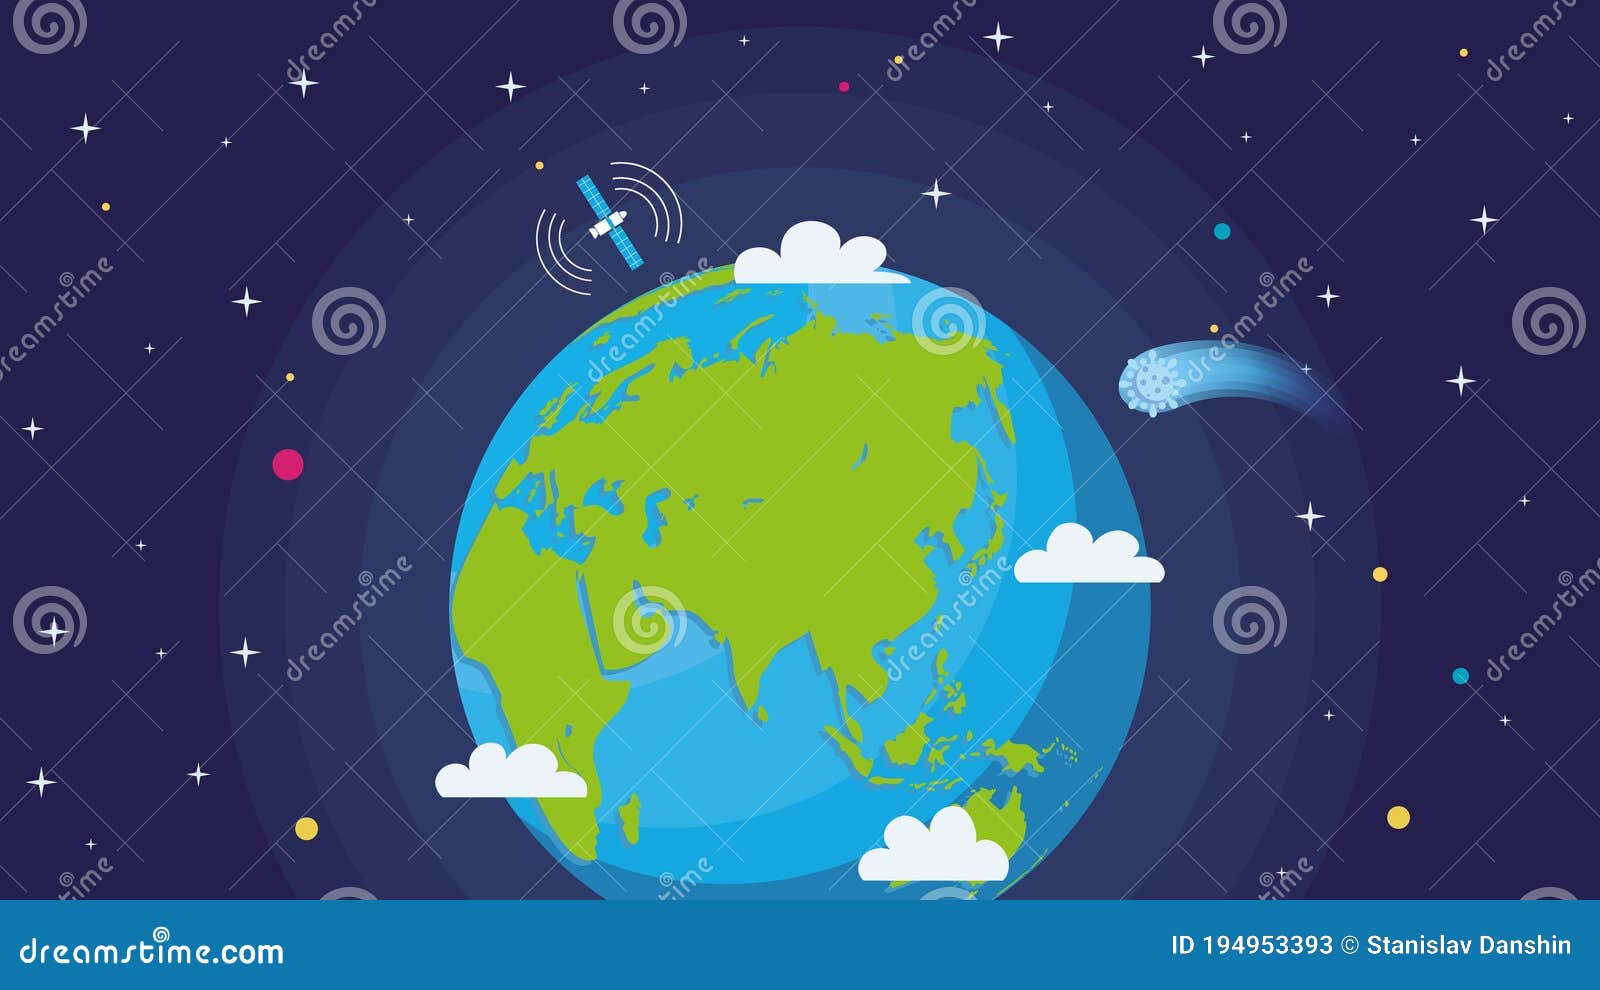 Vector Image of Earth in Space. Illustration of Cartoon Space Background,  Planets, Stars, Comets in Flat Design Stock Vector - Illustration of  spacecraft, galaxy: 194953393